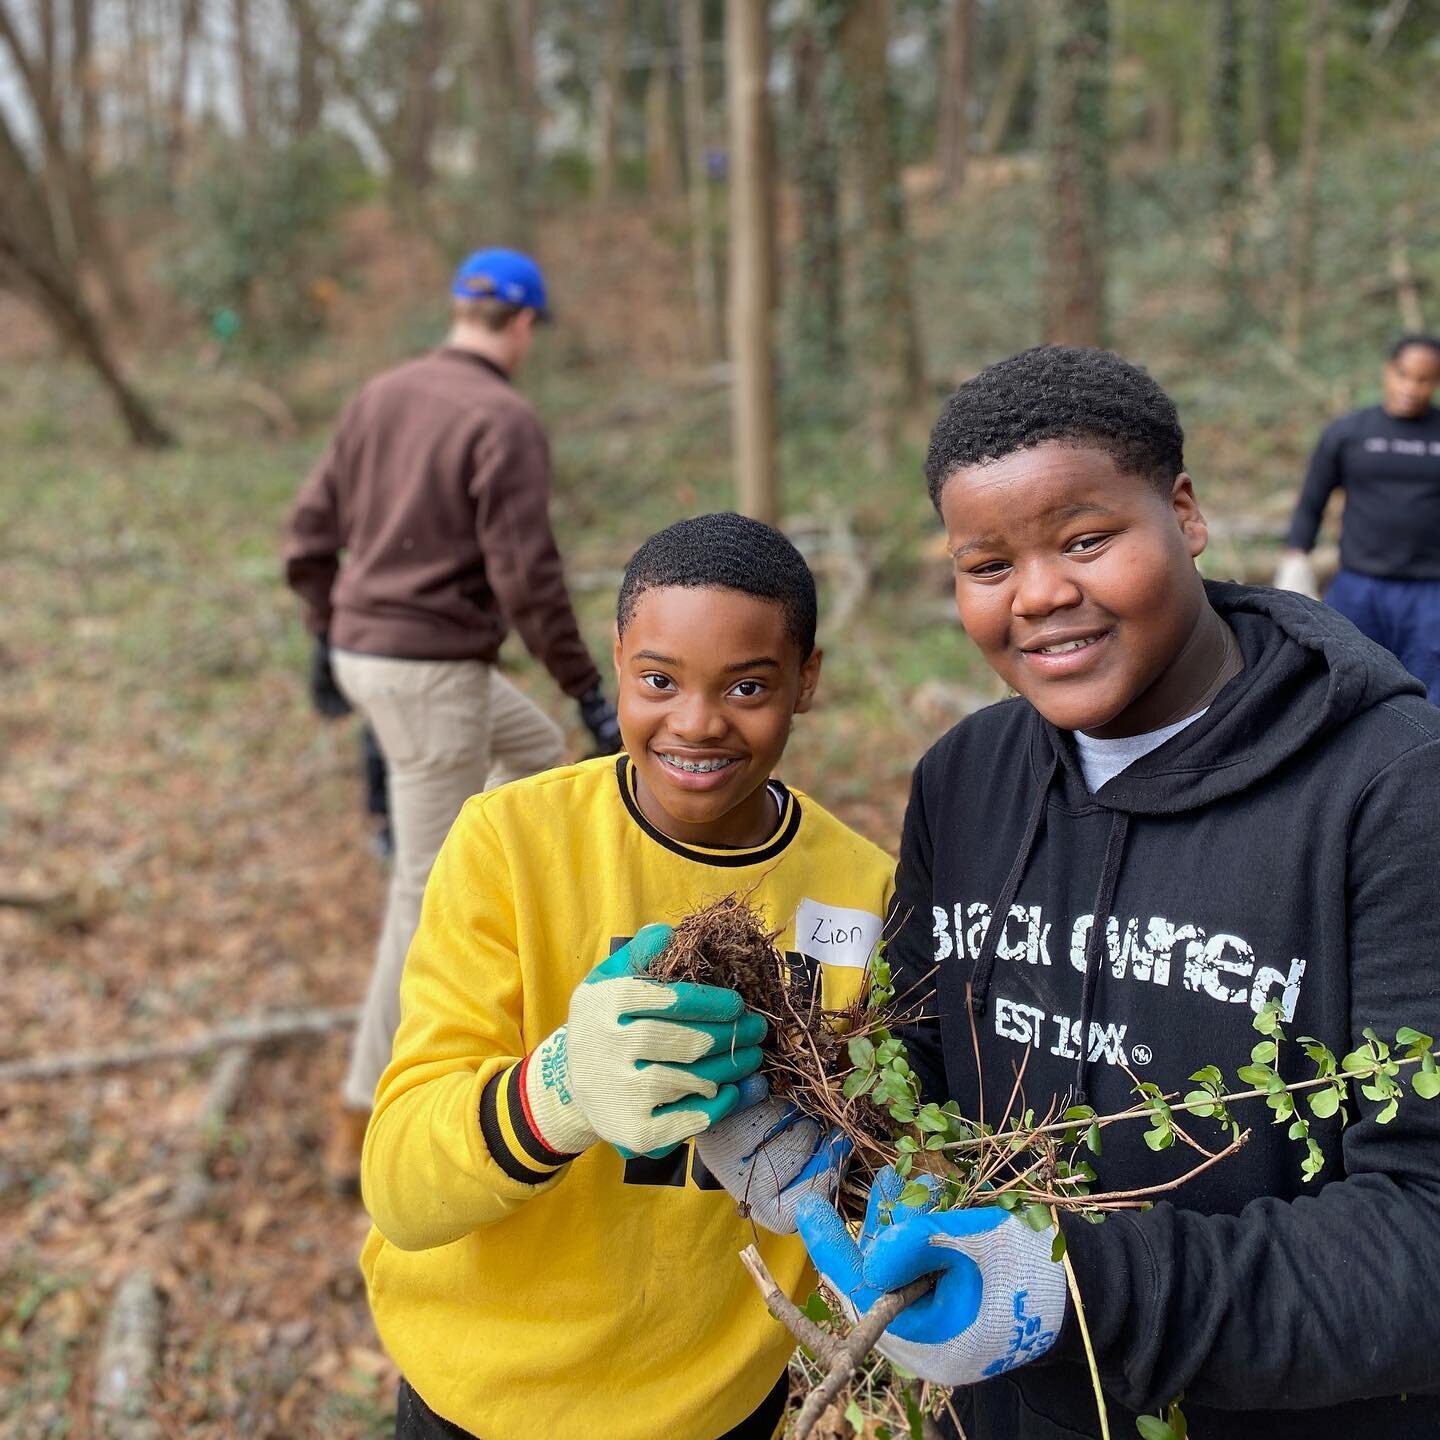 February has been a month of growth and action for A+ Squash!
🌱 We tackled invasive species with @treesatlanta, with the support of our board member, Sawyer!
⚫️ Students competed at @atlantacommunitysquash &lsquo;s Junior Challenger run by Coach Tom